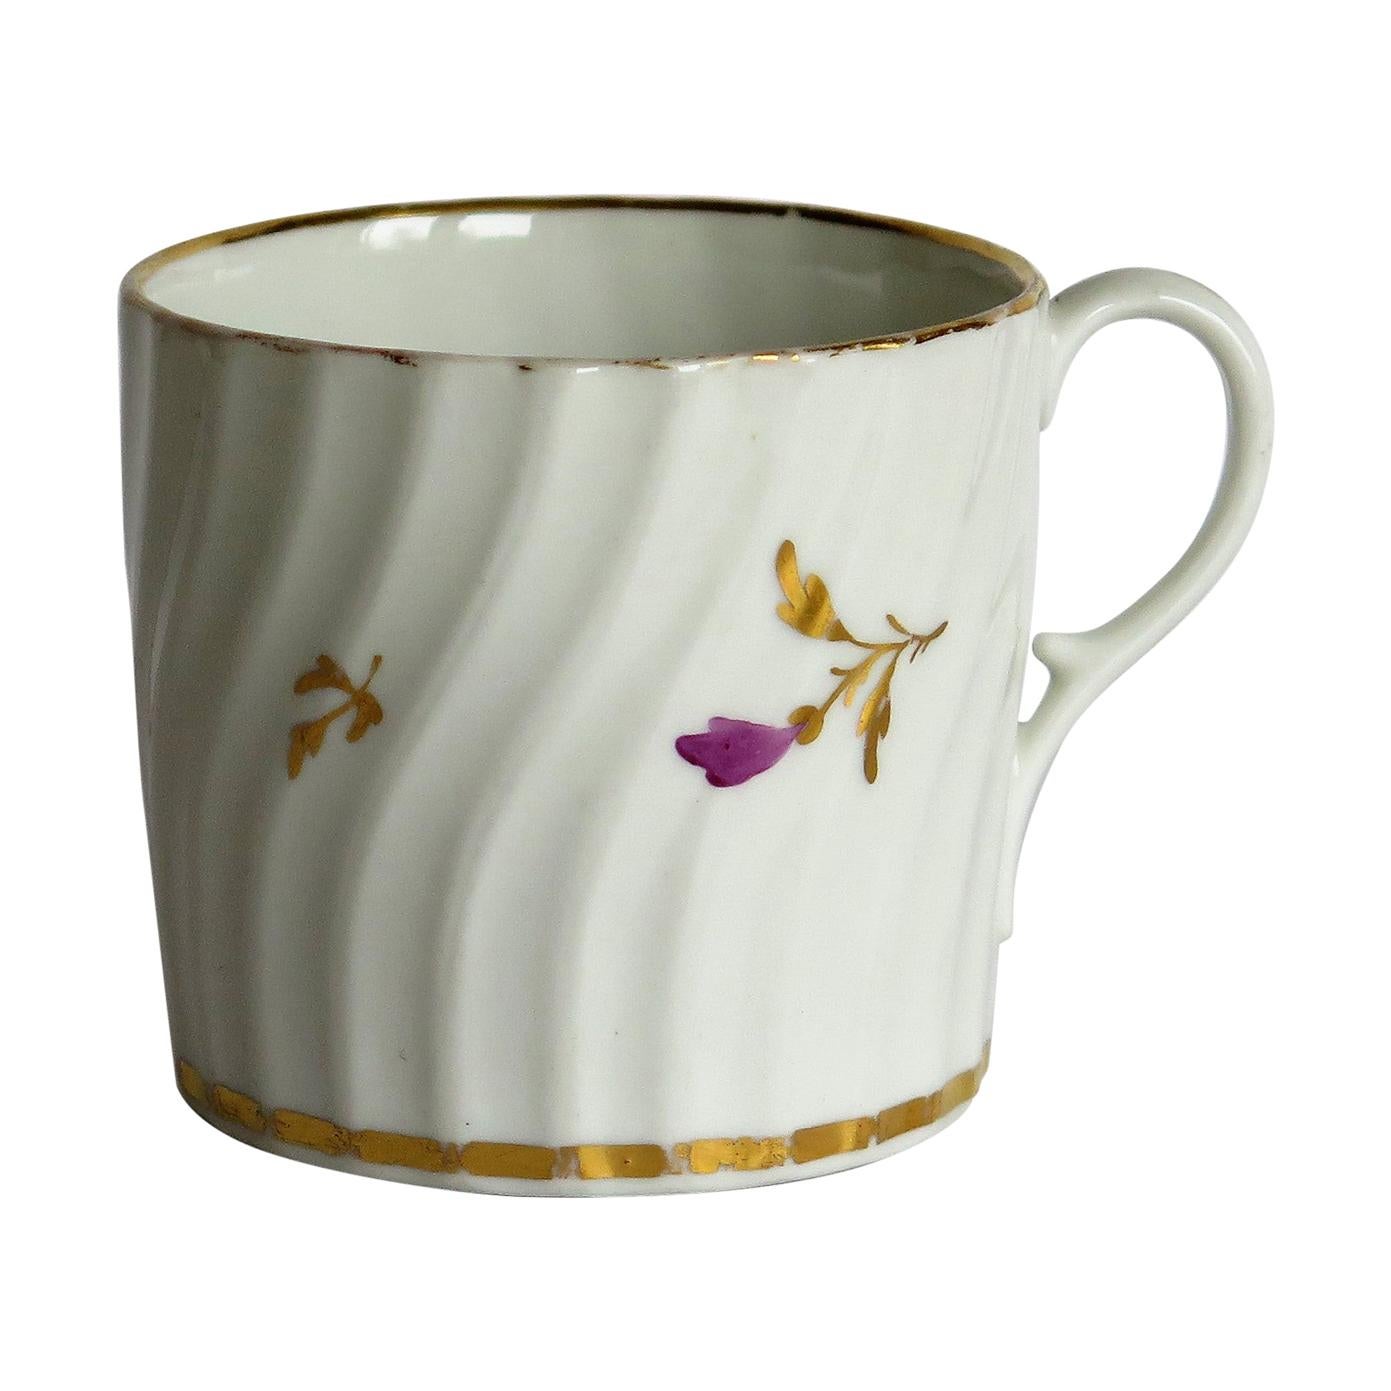 Early Porcelain Coffee Can Possibly Grainger Hand Painted and Gilded, circa 1800